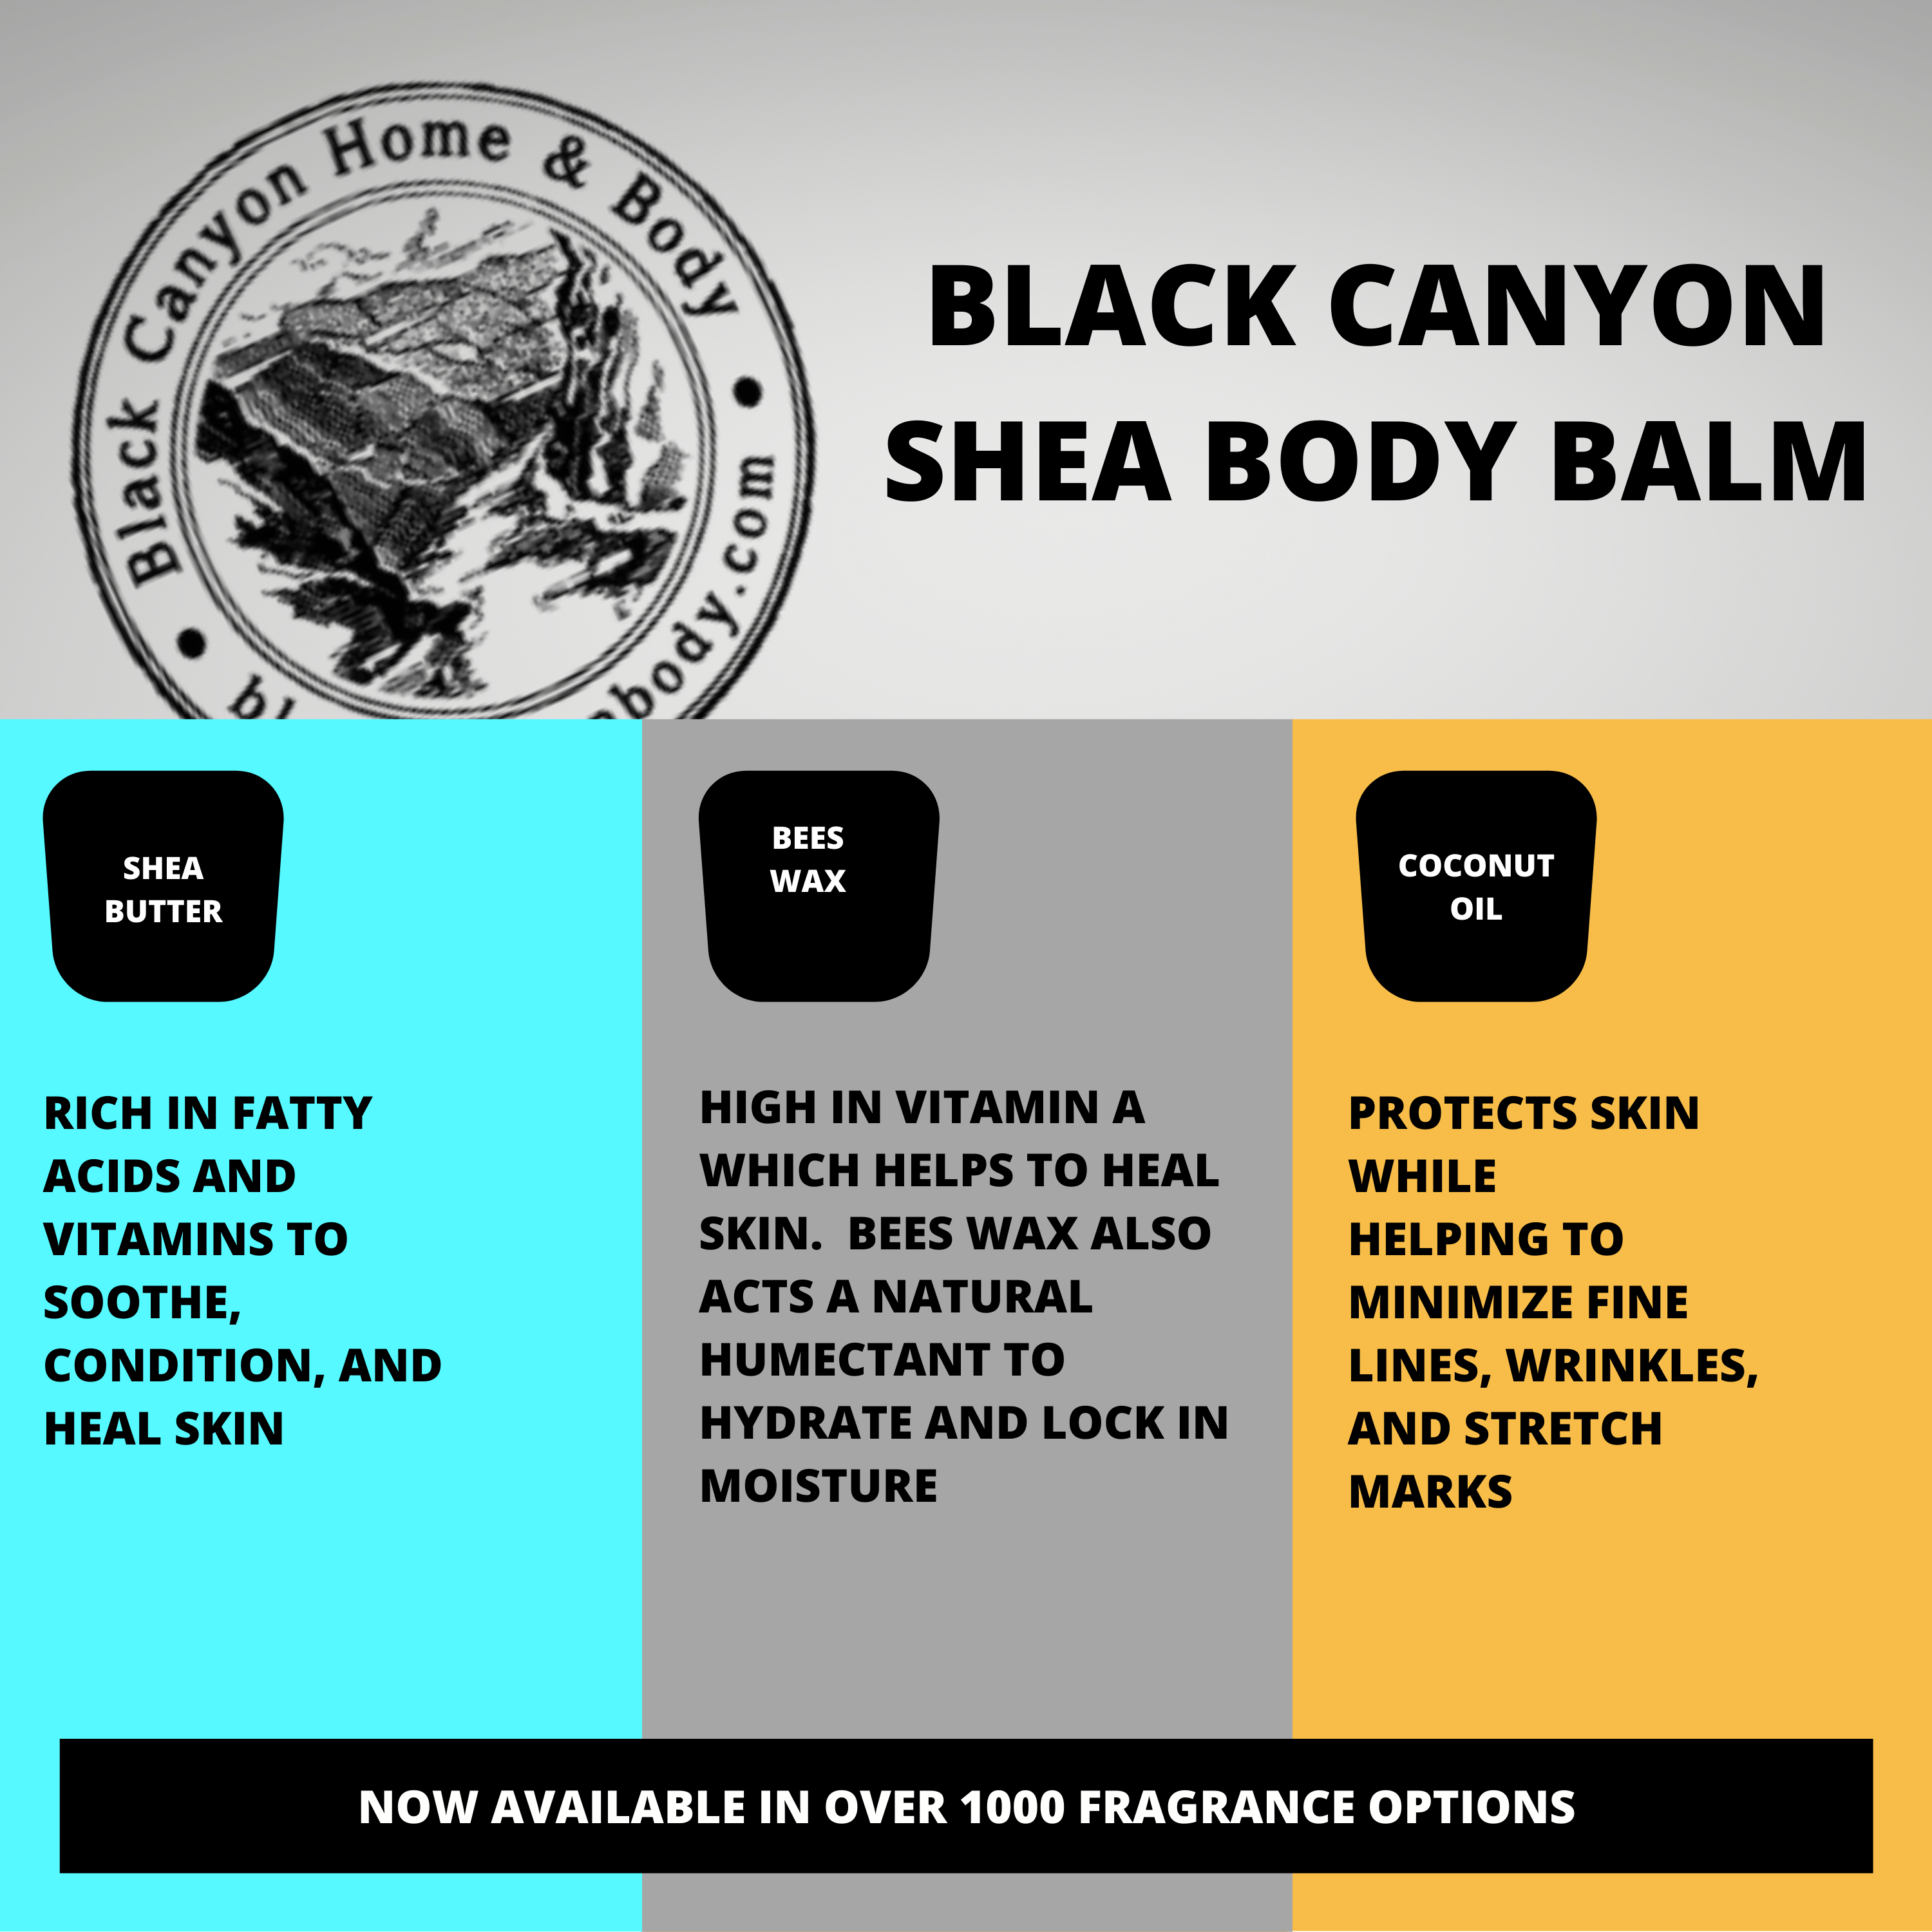 Black Canyon Simply Sinful Scented Natural Body Balm with Shea